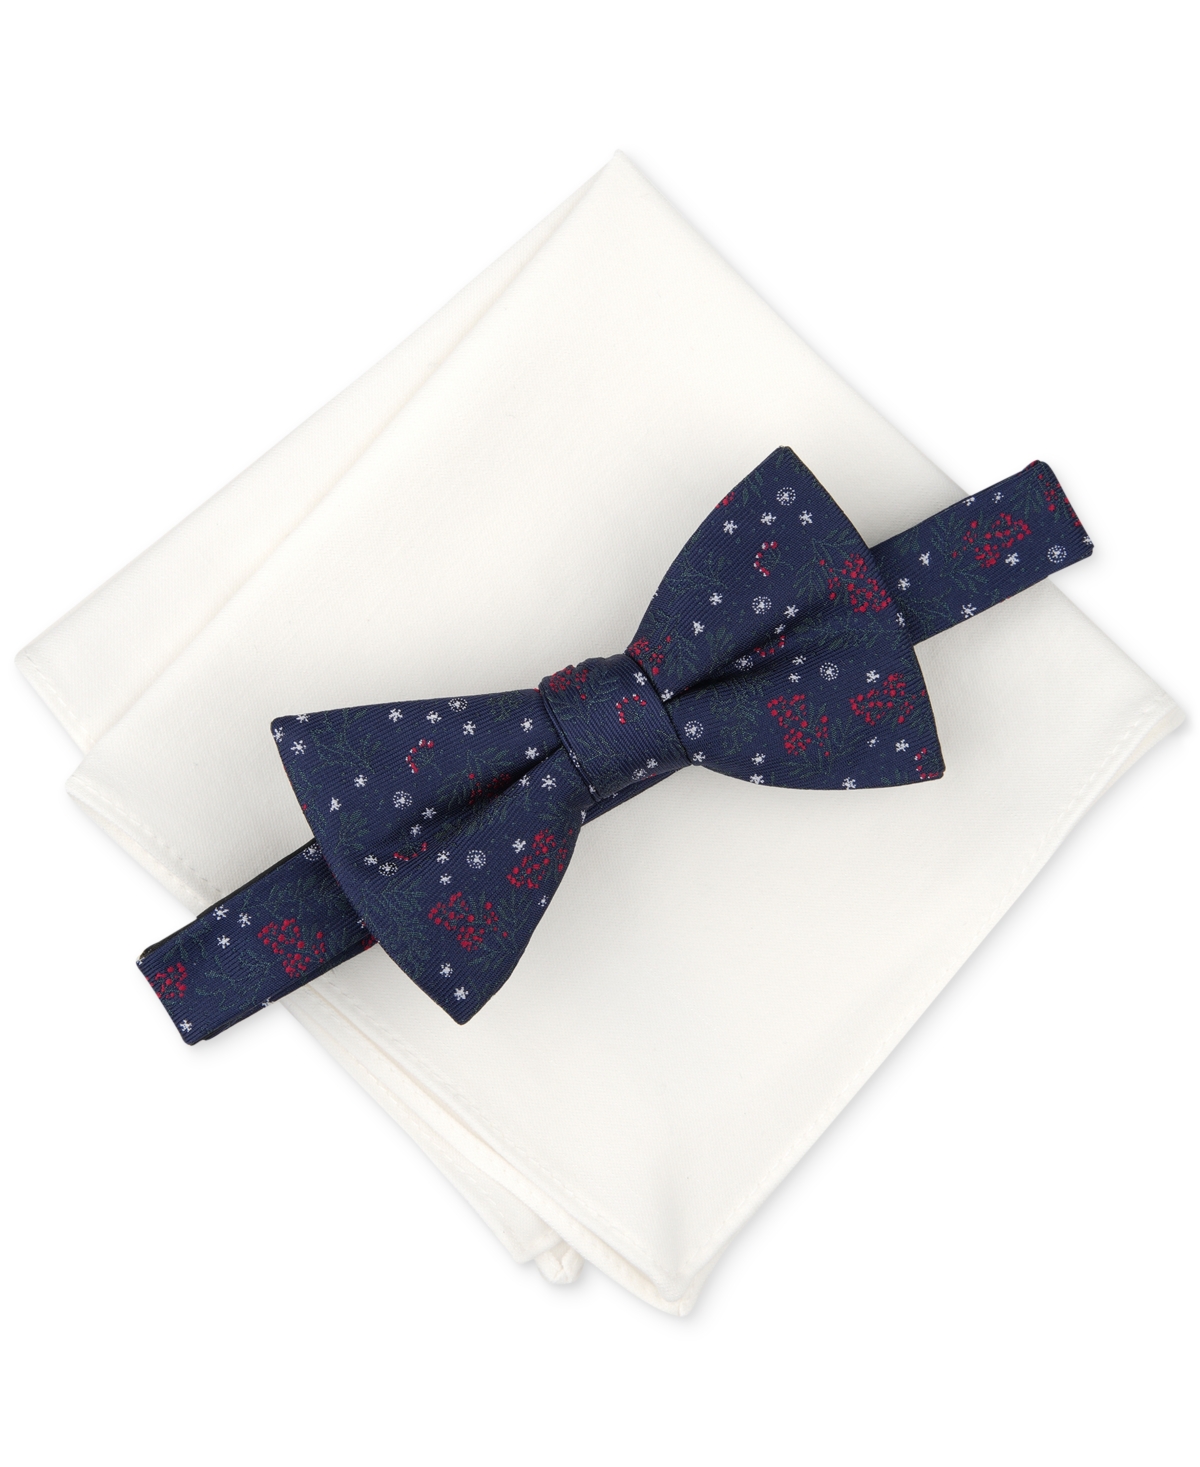 Men's Weldon Floral Bow Tie & Pocket Square Set, Created for Macy's - Navy